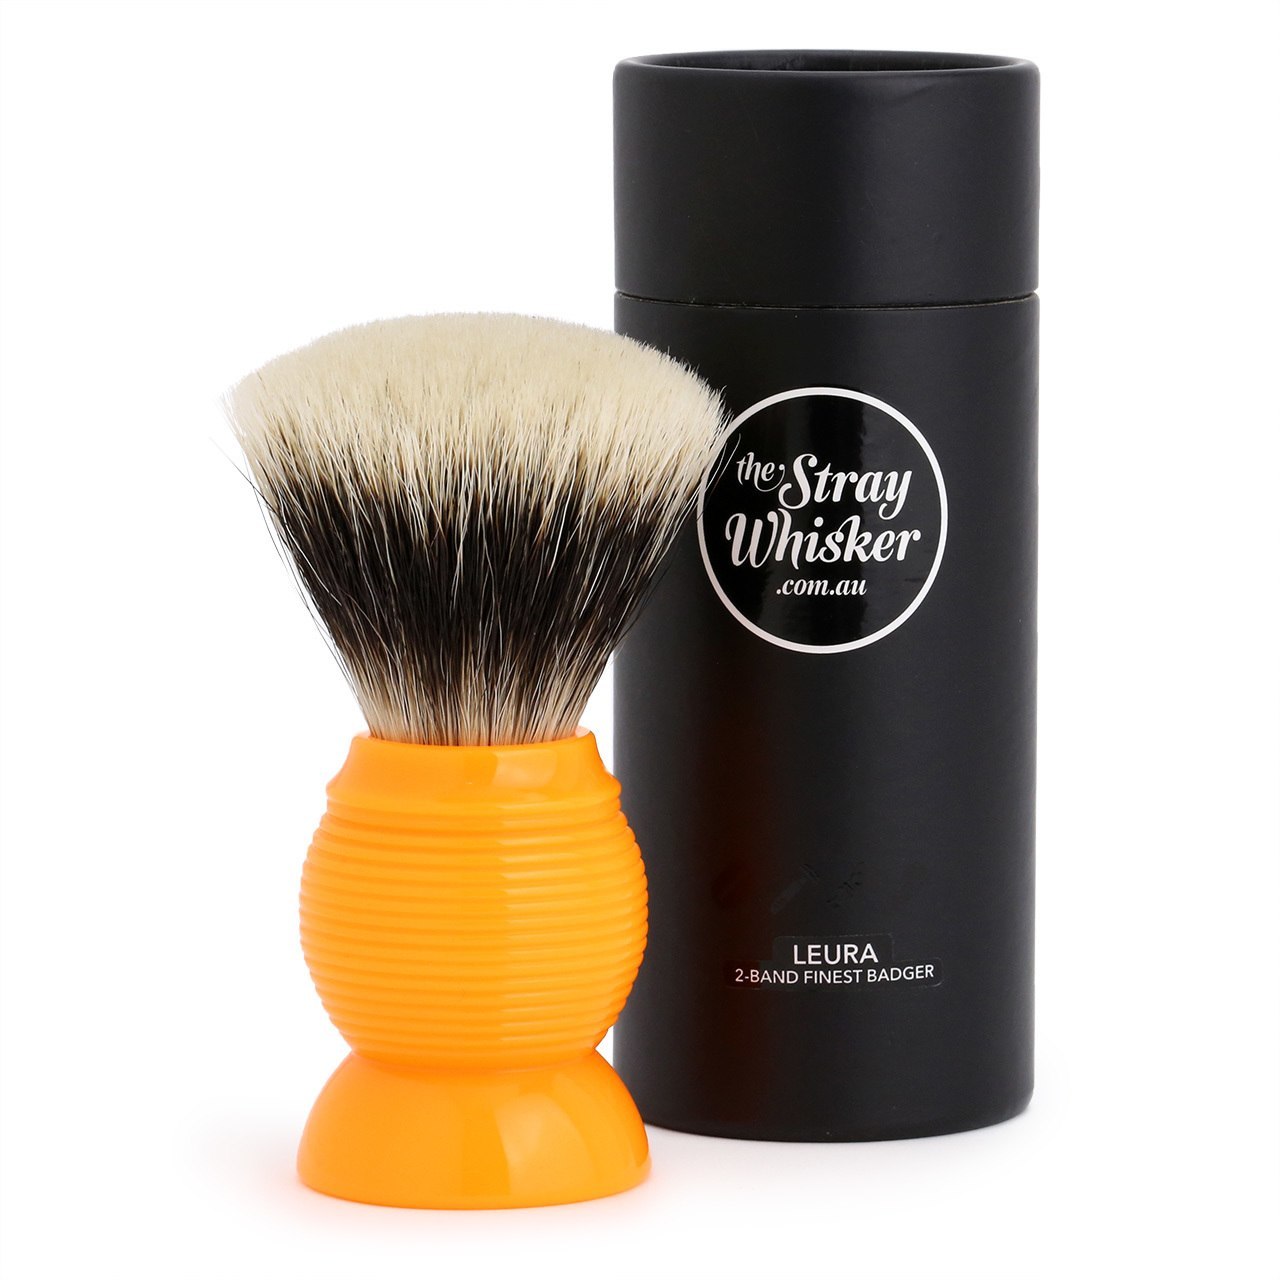 "The Leura" 2 Band Finest Badger Shave Brush in Sunset Colour